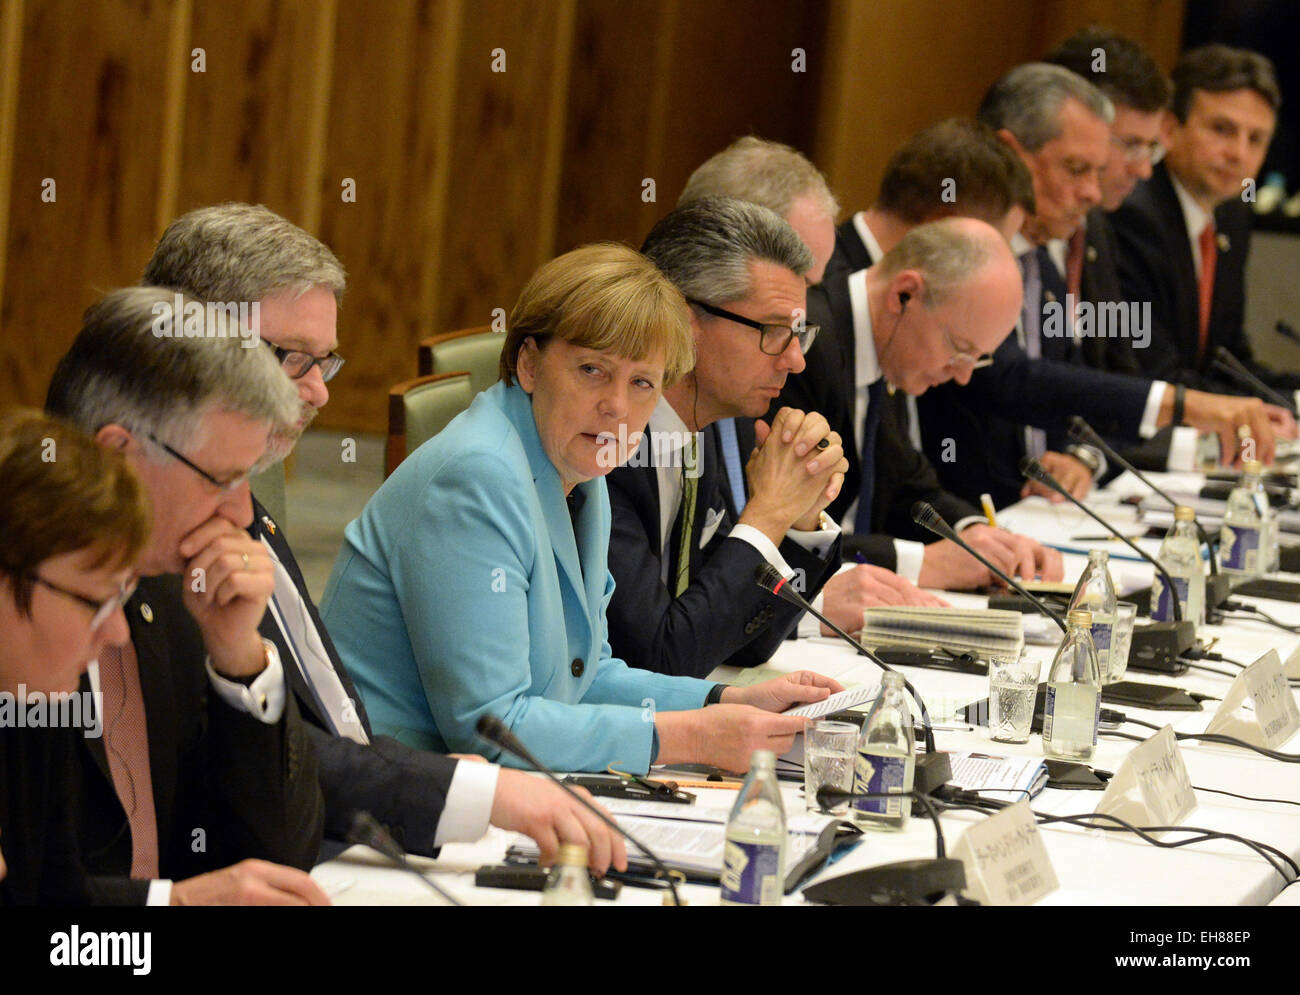 Tokyo, Japan. 9th Mar, 2015. Germany's Chancellor Angela Merkel (4th L) and Japan's Prime Minister Shinzo Abe (not pictured) take part in a meeting with German and Japanese business leaders in Tokyo, Japan, March 9, 2015. © Ma Ping/Xinhua/Alamy Live News Stock Photo